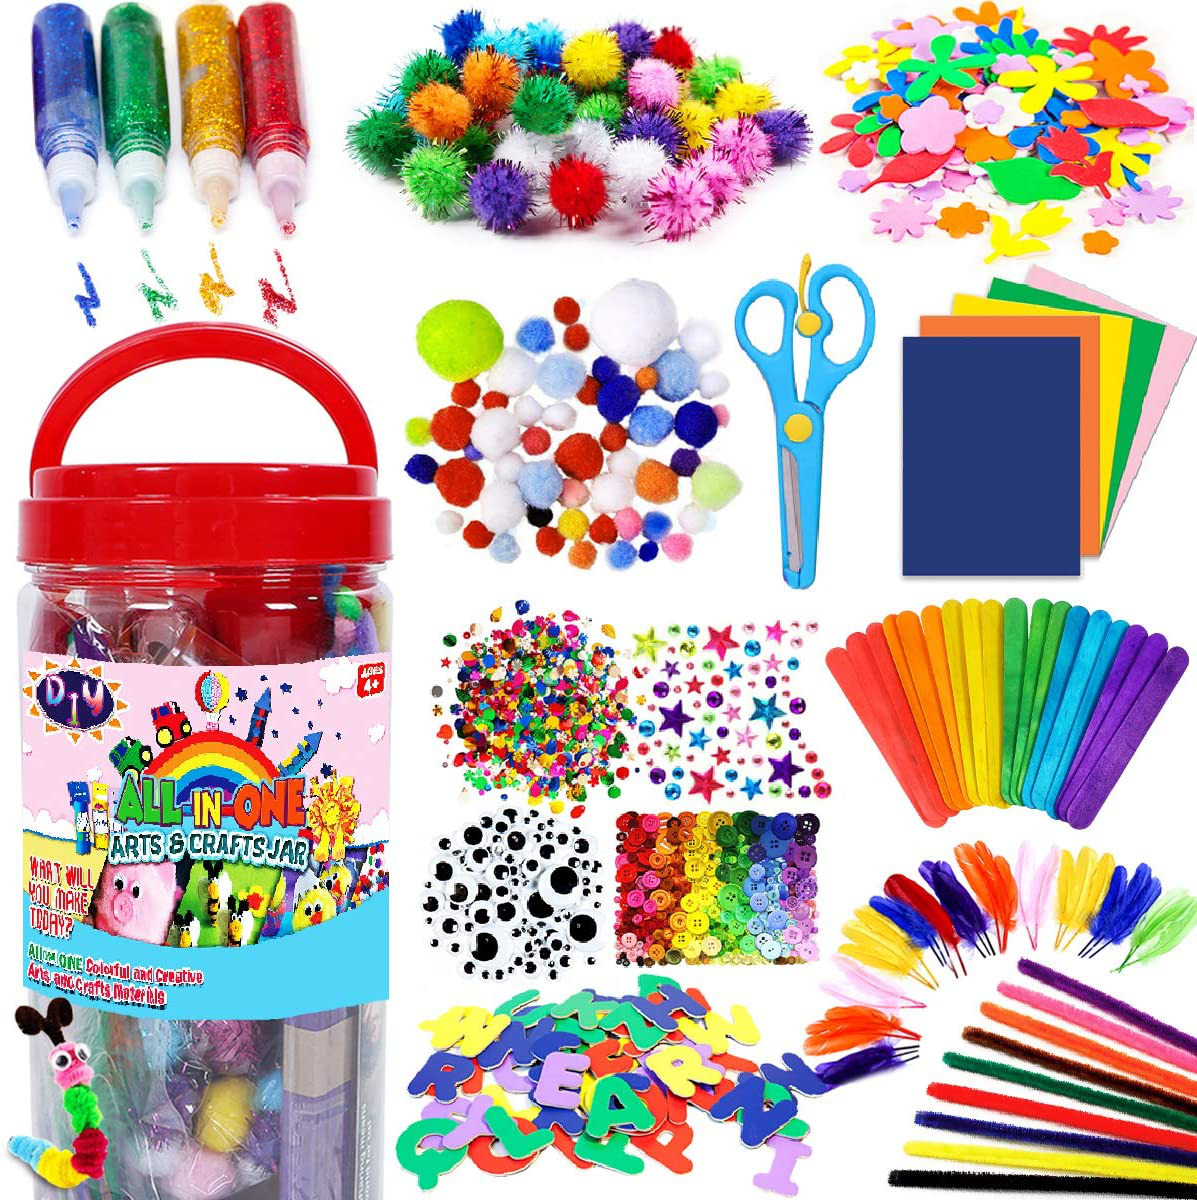 FunzBo Arts and Crafts Supplies for Kids - Craft Art Supply Kit for Toddlers 4